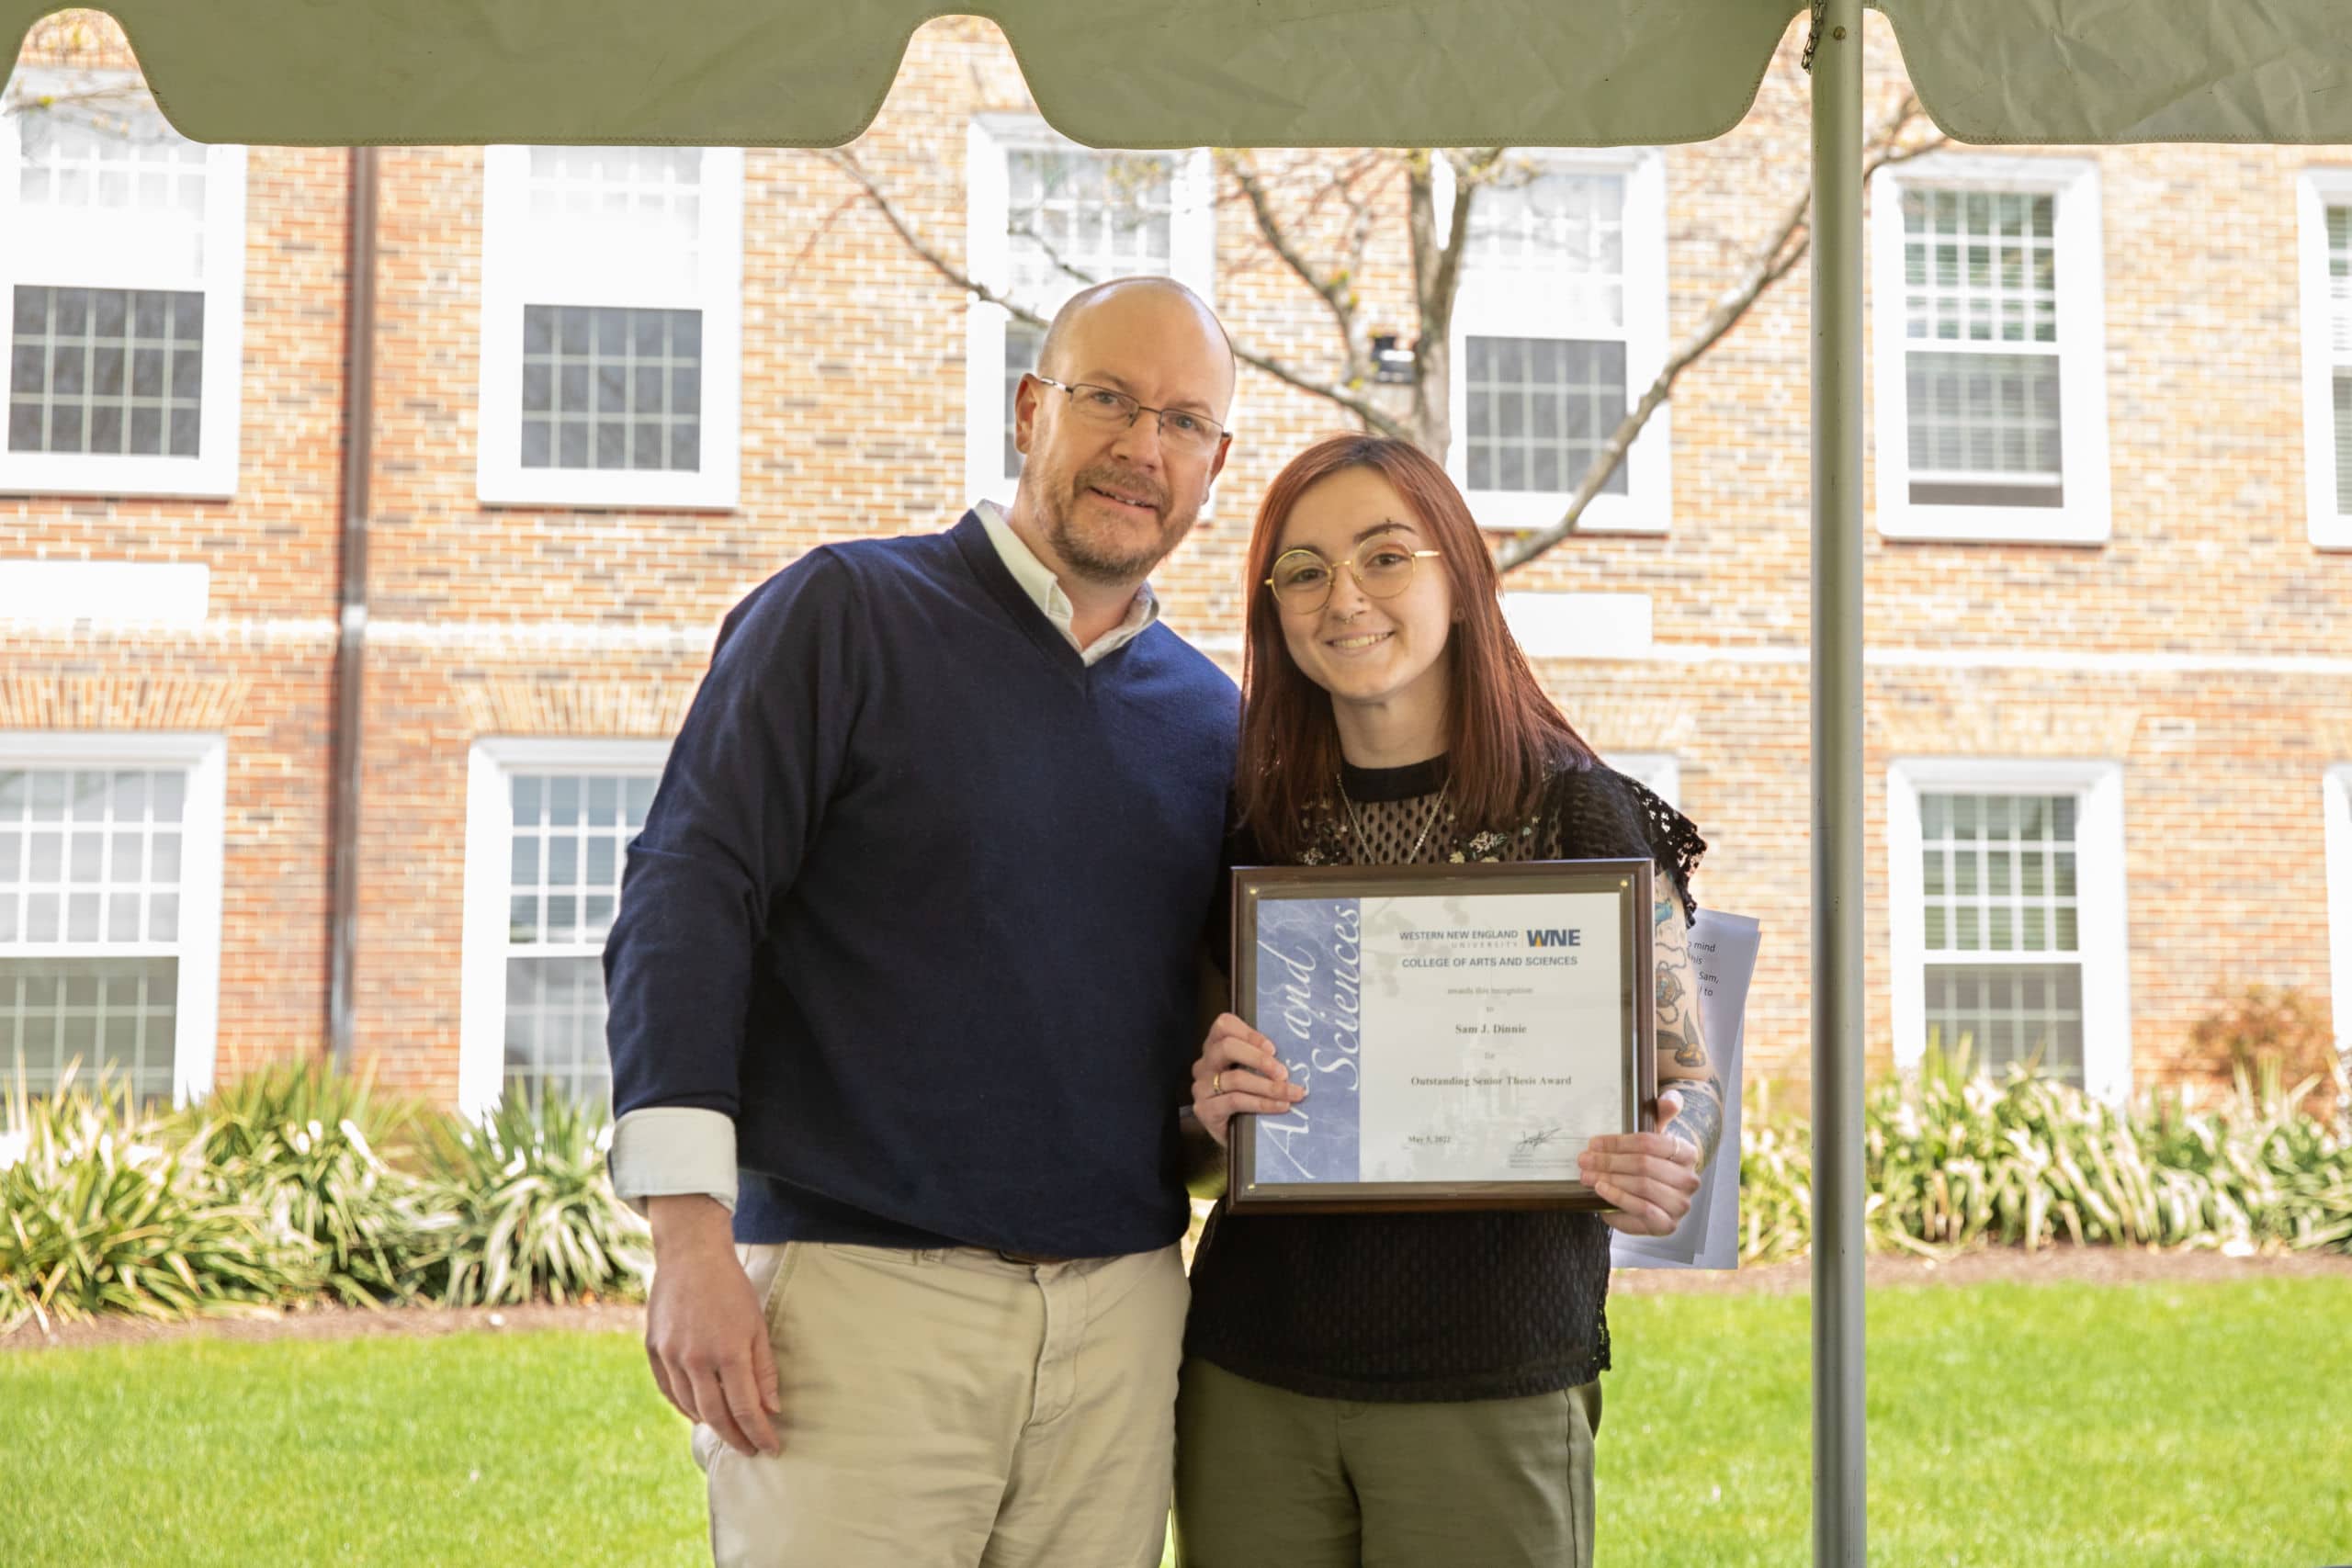 Two smiling people holding a certificate outdoors on a college campus.